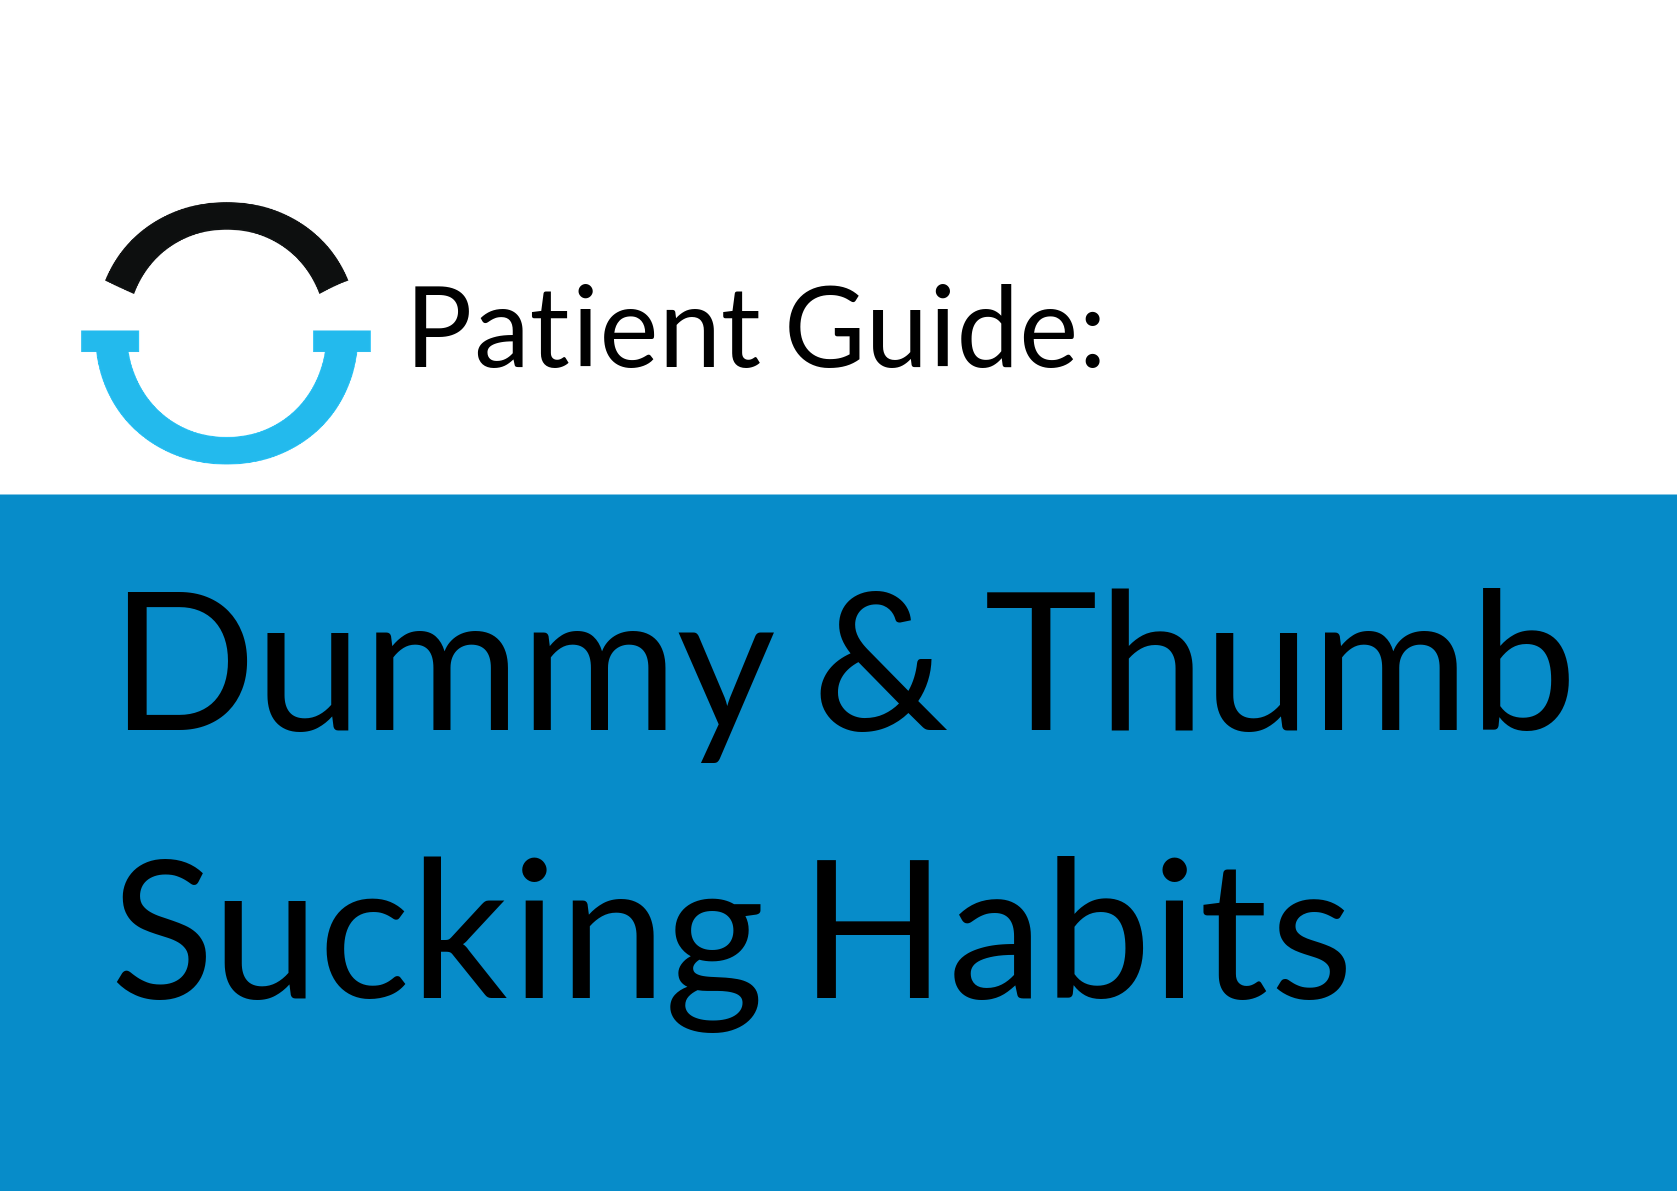 Patient Guide Header Image – Dummy & Thumb Sucking Habits LARGE